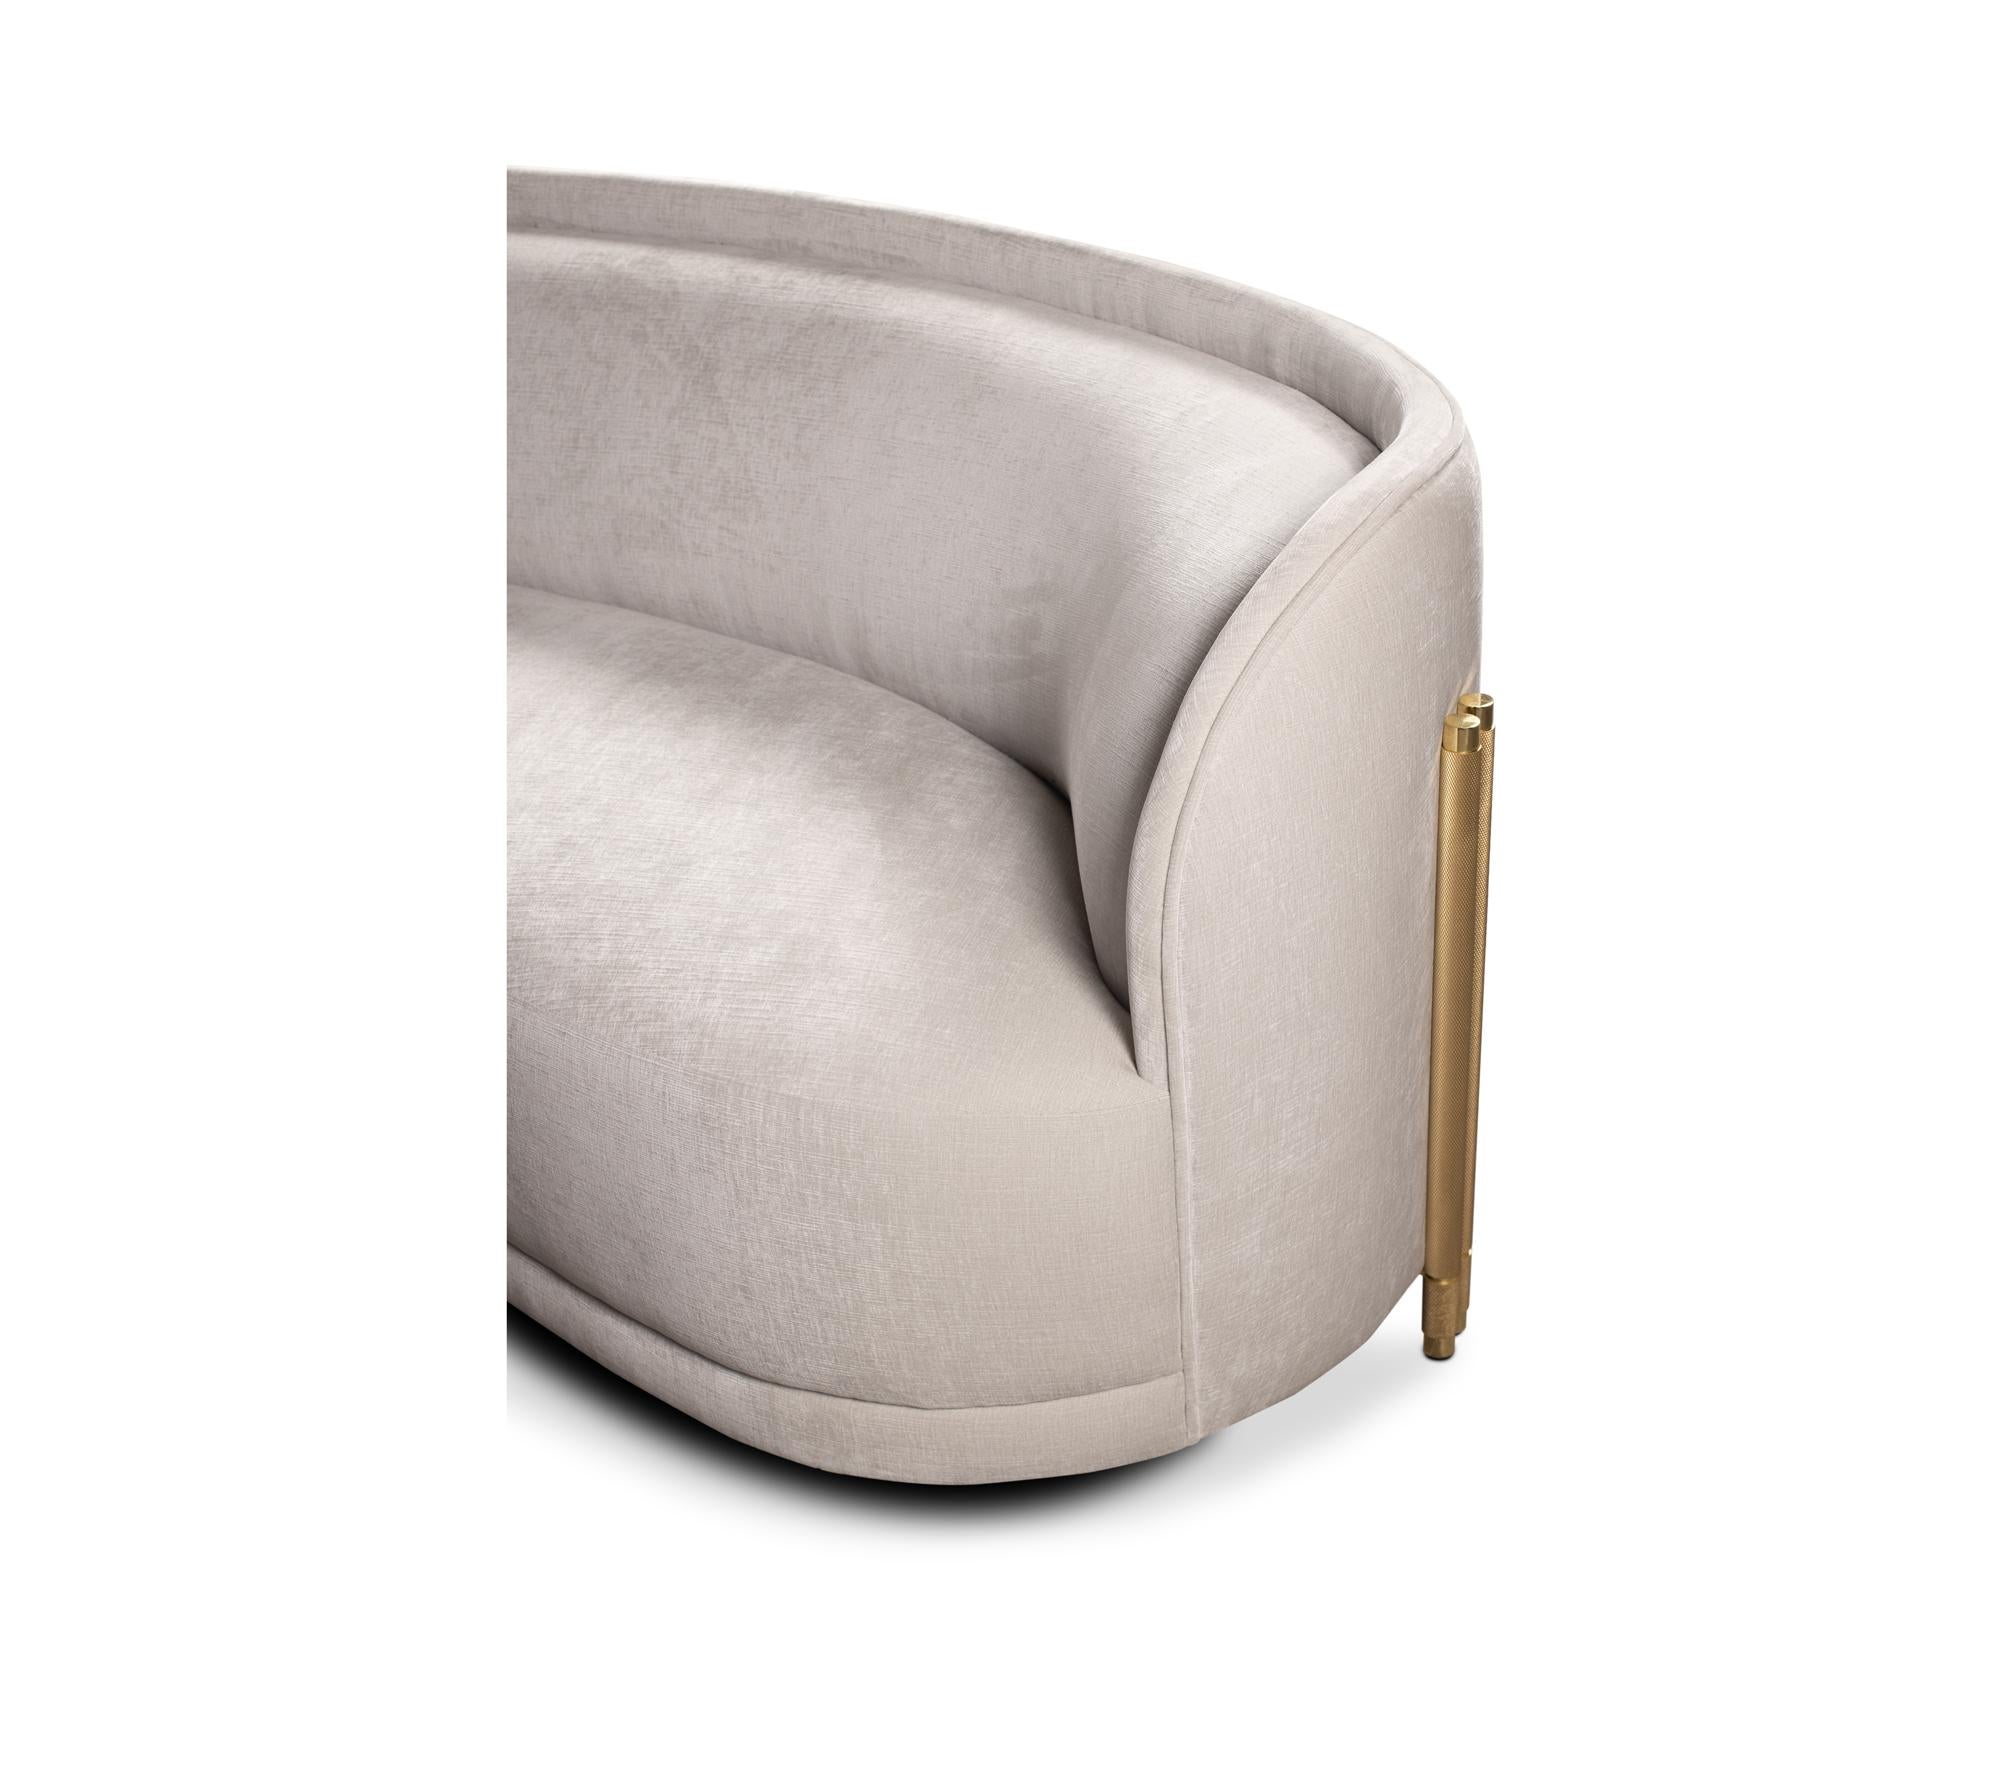 Seduire II Sofa by Memoir Essence
Dimensions: D 125 x W 280 x H 76 cm.
Materials: Knurled and polished brass and velvet upholstery.

Immerse in Memoir´s world with our new piece Seduire II, characterized by an organic and opulent shape, this sofa